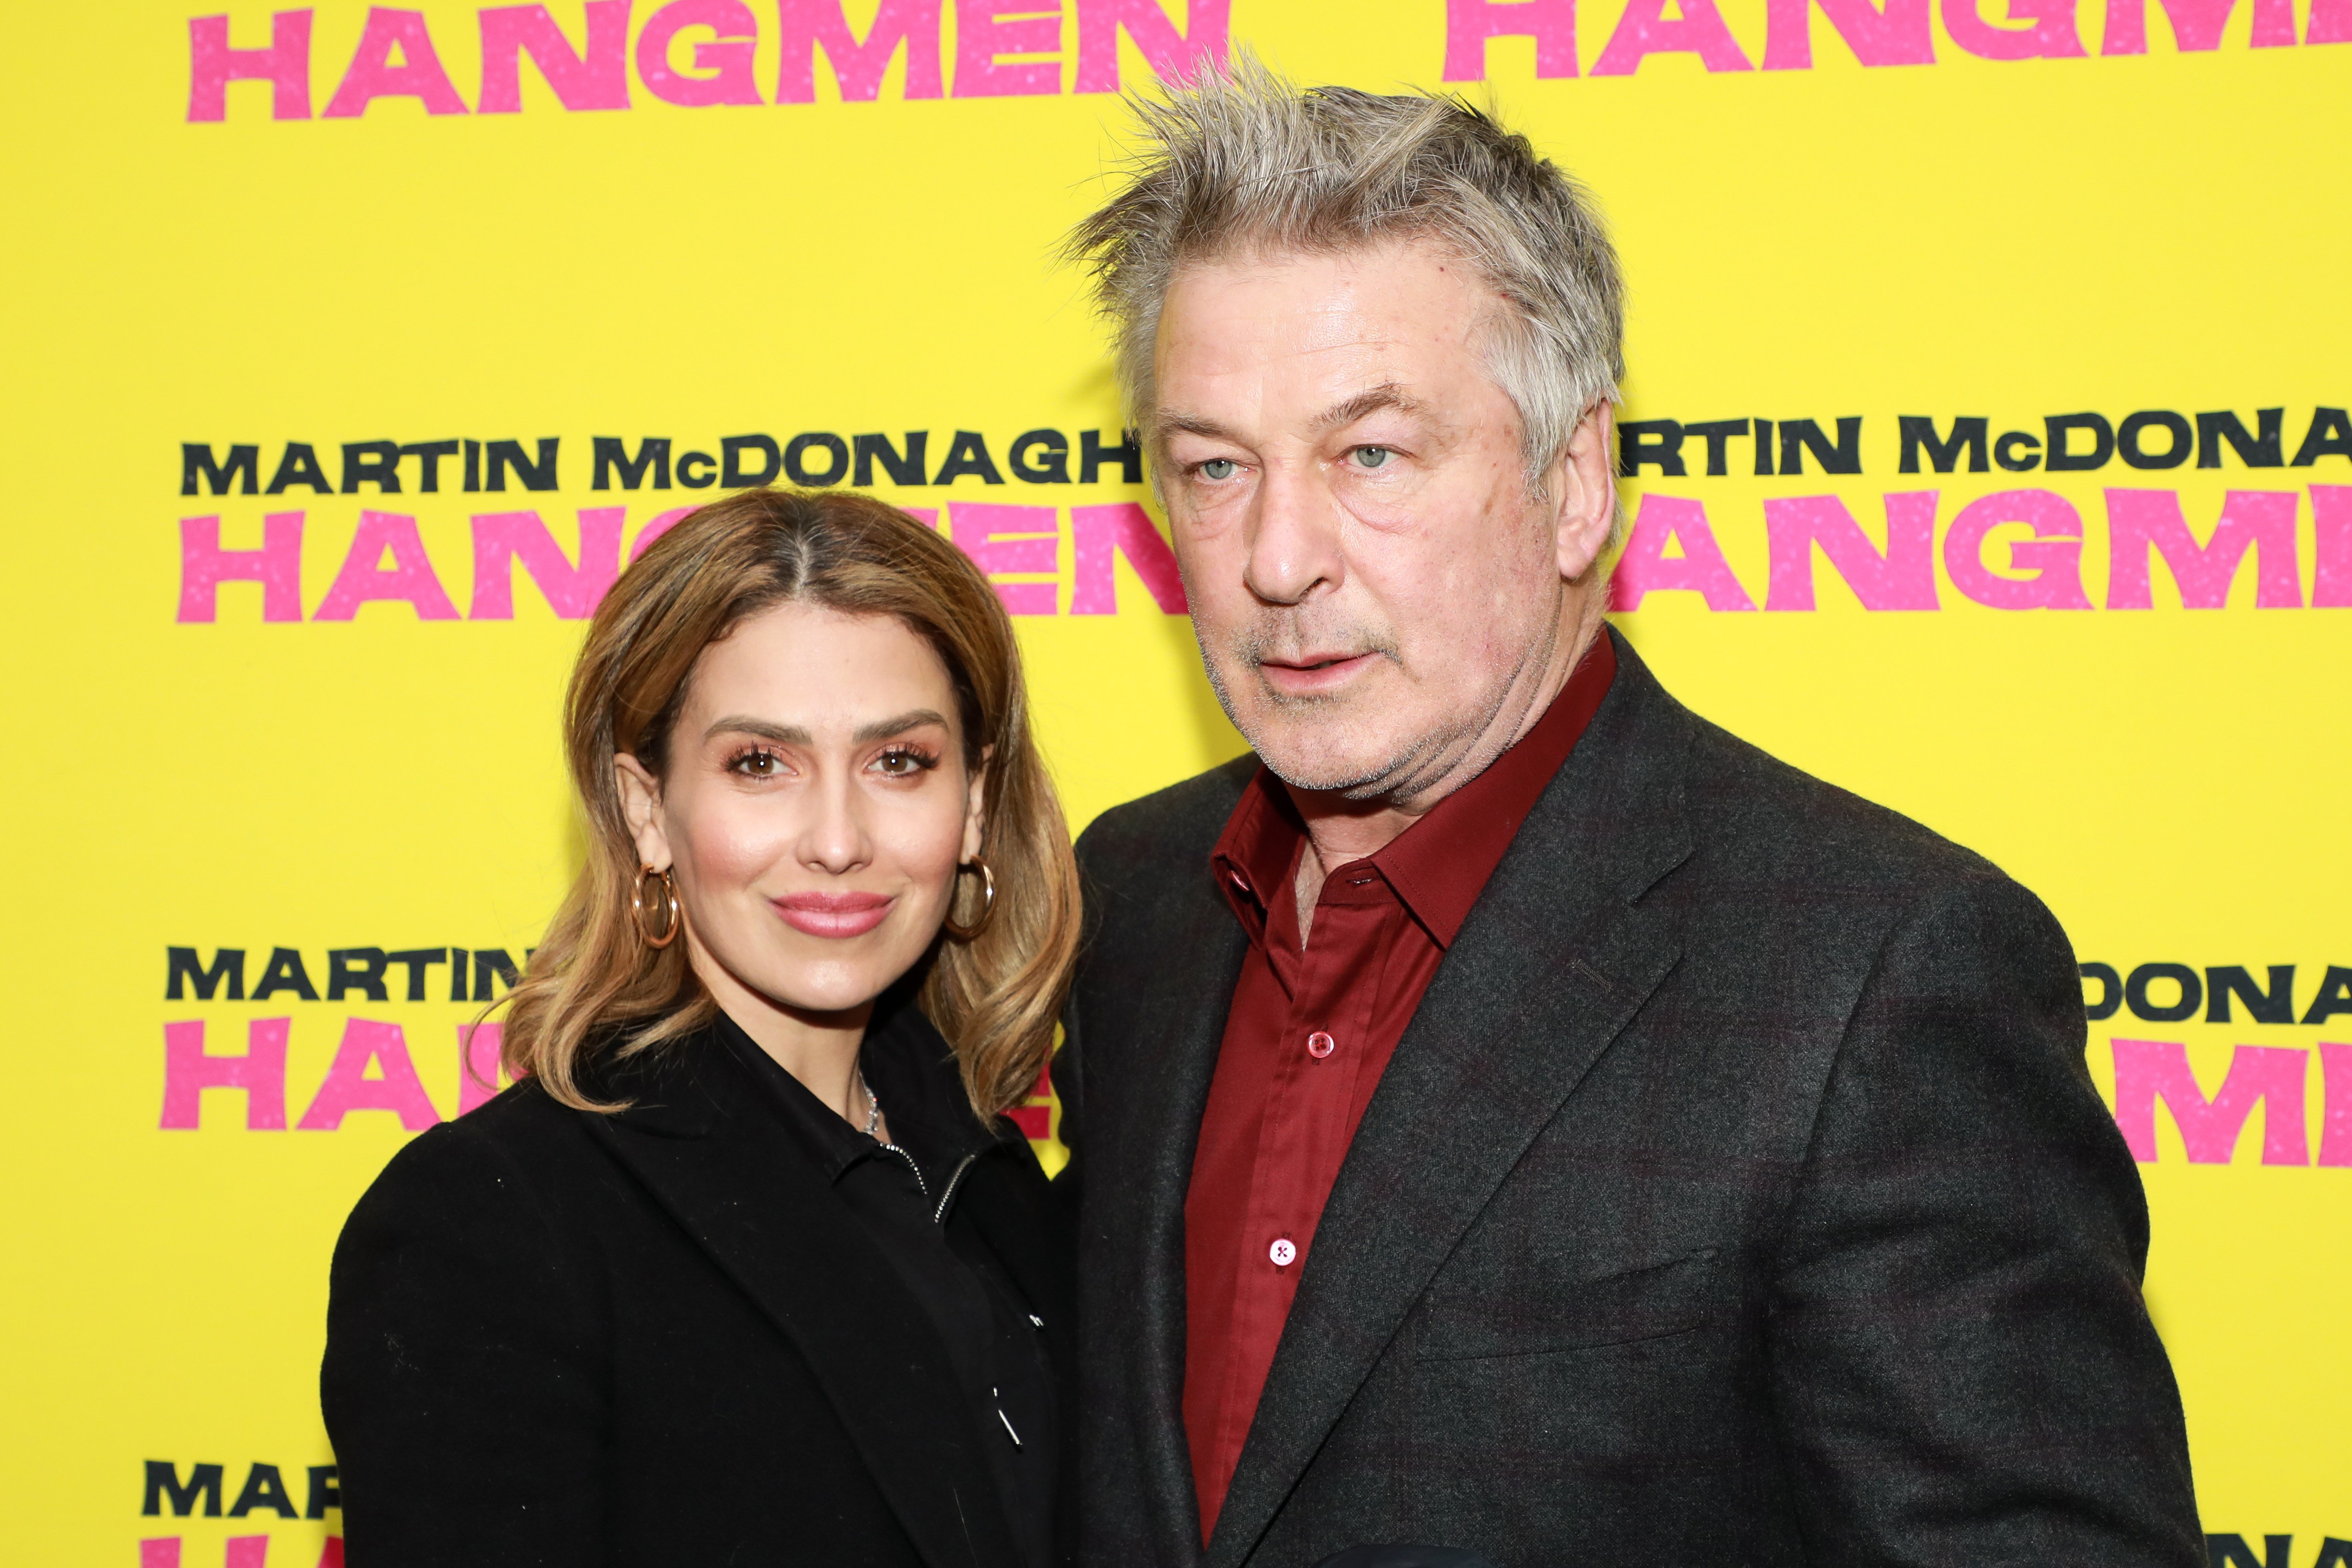 Hilaria and Alec Baldwin at the opening night of "Hangmen" on Broadway on April 21, 2022, in New York City | Source: Getty Images